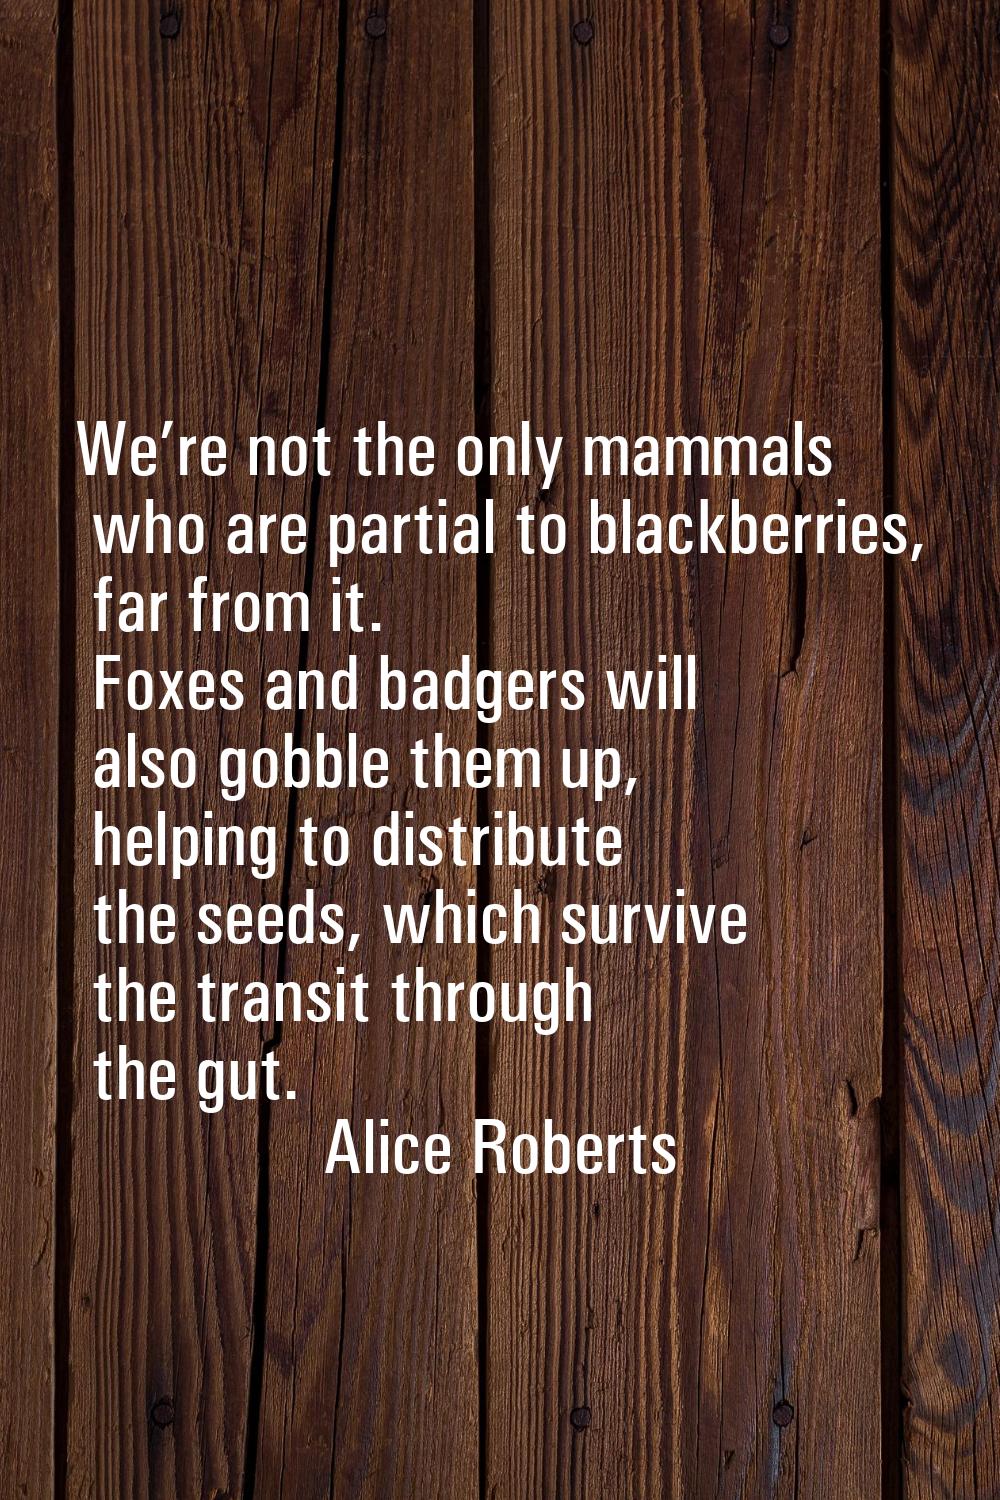 We’re not the only mammals who are partial to blackberries, far from it. Foxes and badgers will als